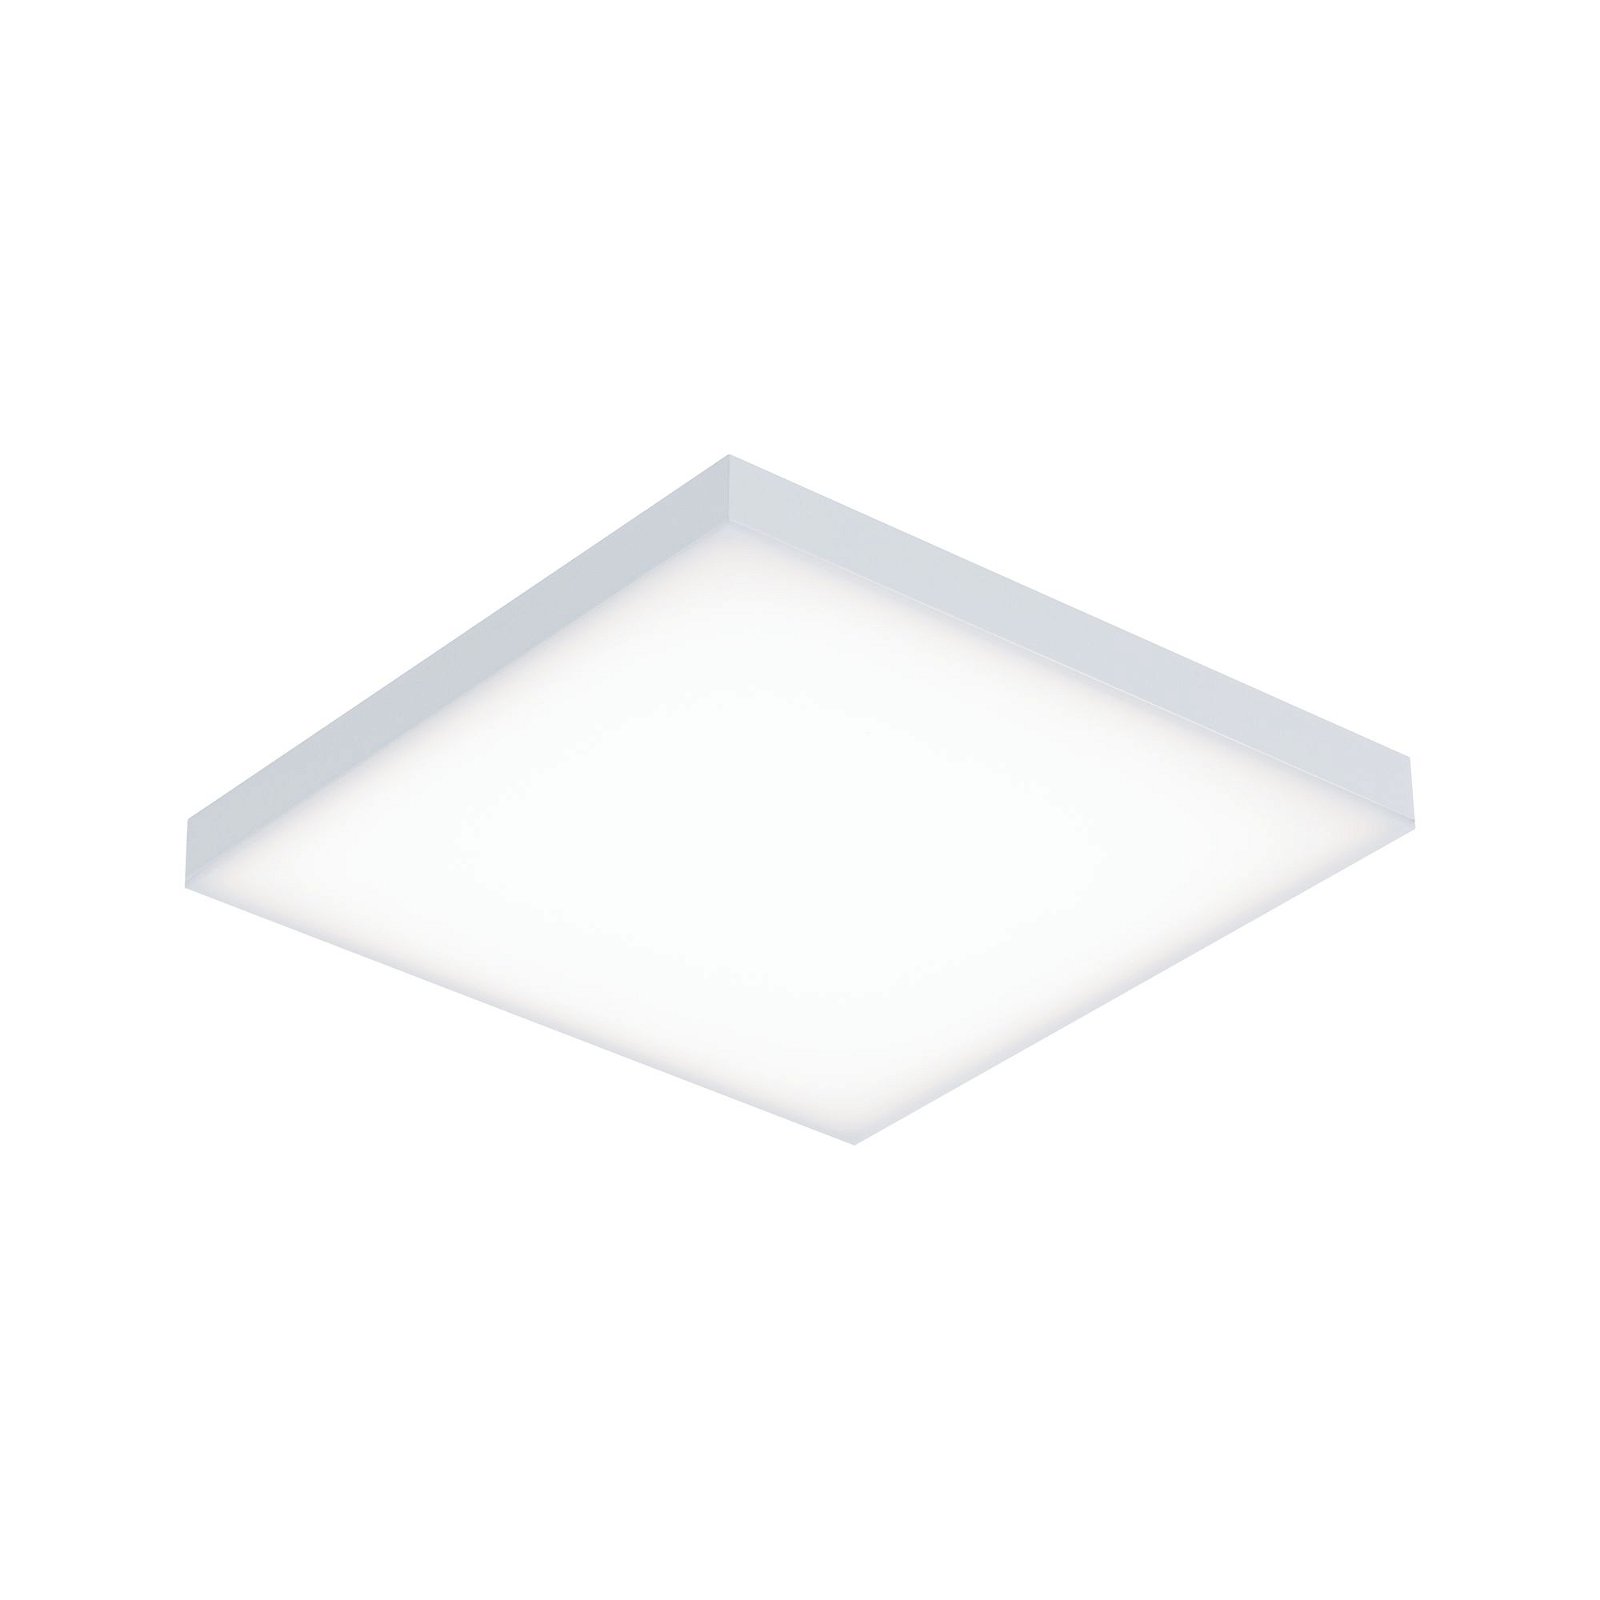 LED Panel Smart Home Zigbee Velora square 225x225mm 8,5W 800lm Tunable White Matt white dimmable